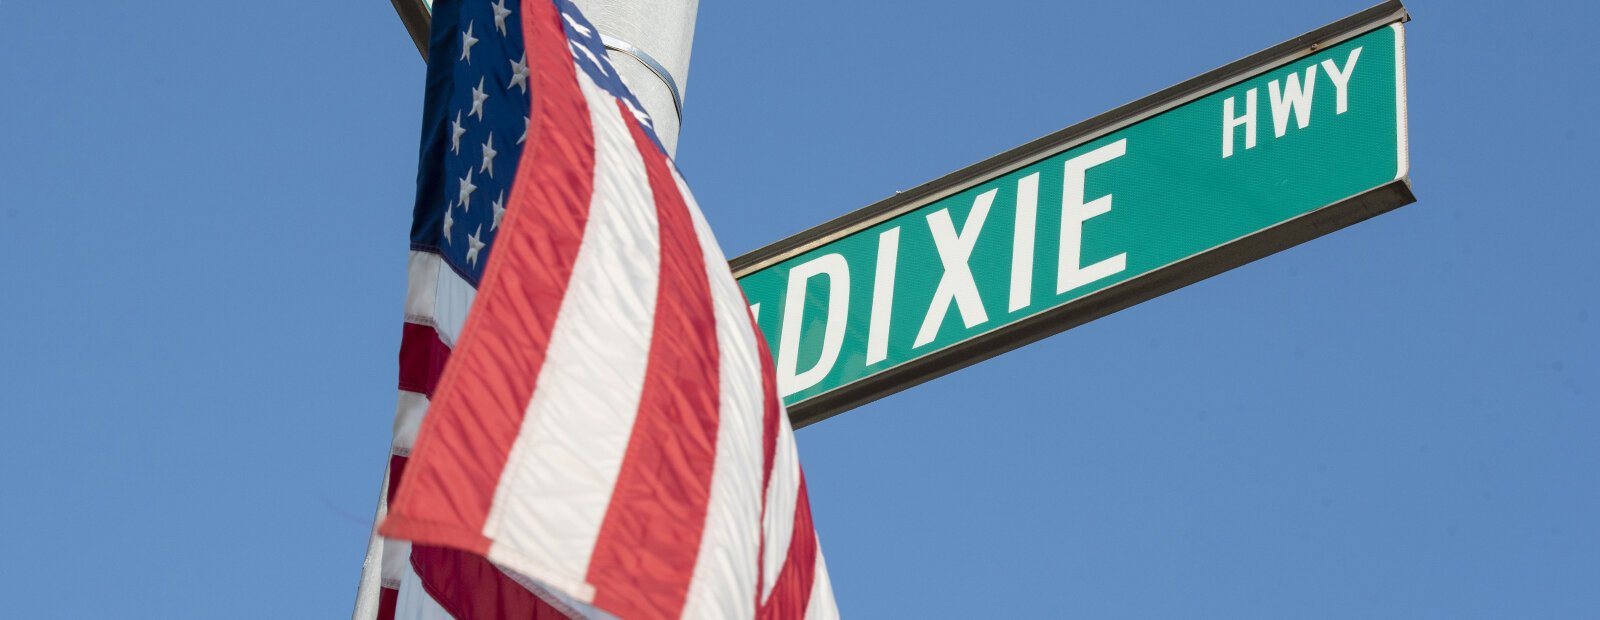 Conceived as part of a national road only 50 years after the Civil War, Dixie Highway was the scene of Northern Kentucky's largest march of Black Lives Matter protestors.